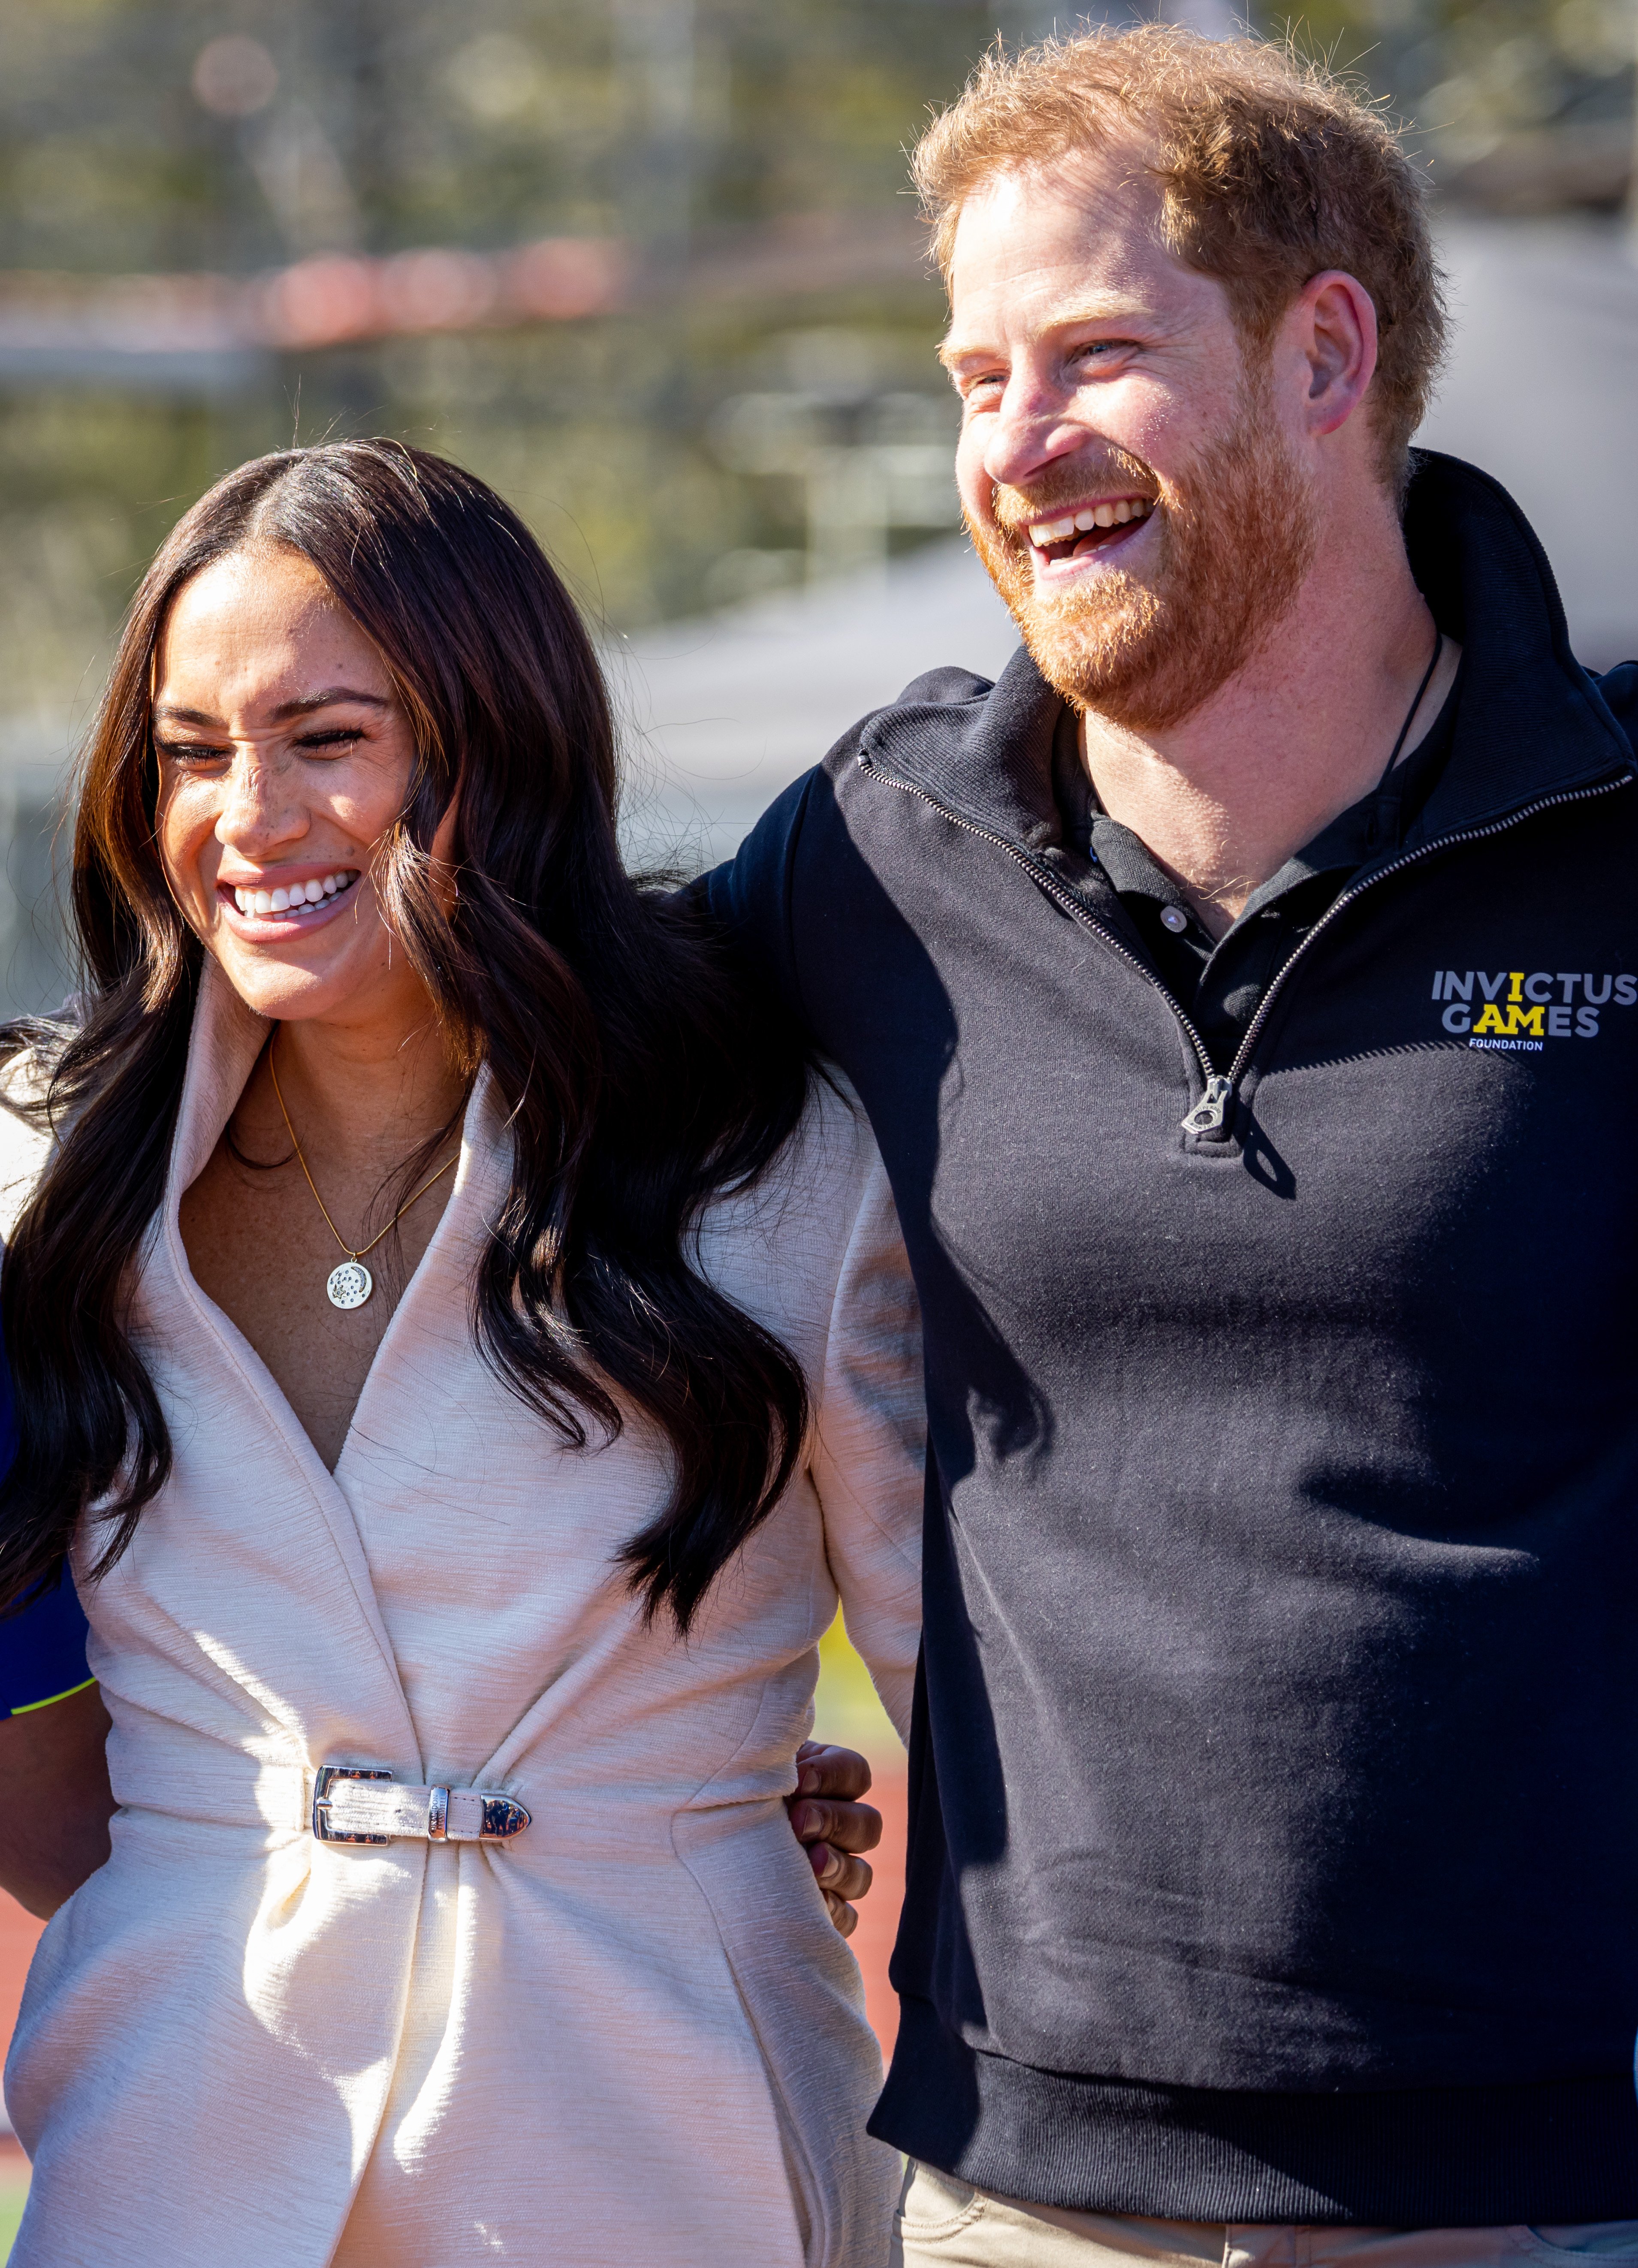 Meghan Markle and Prince Harry at the Invictus Games on April 17, 2022 in The Hague, Netherlands |  Source: Getty Images 